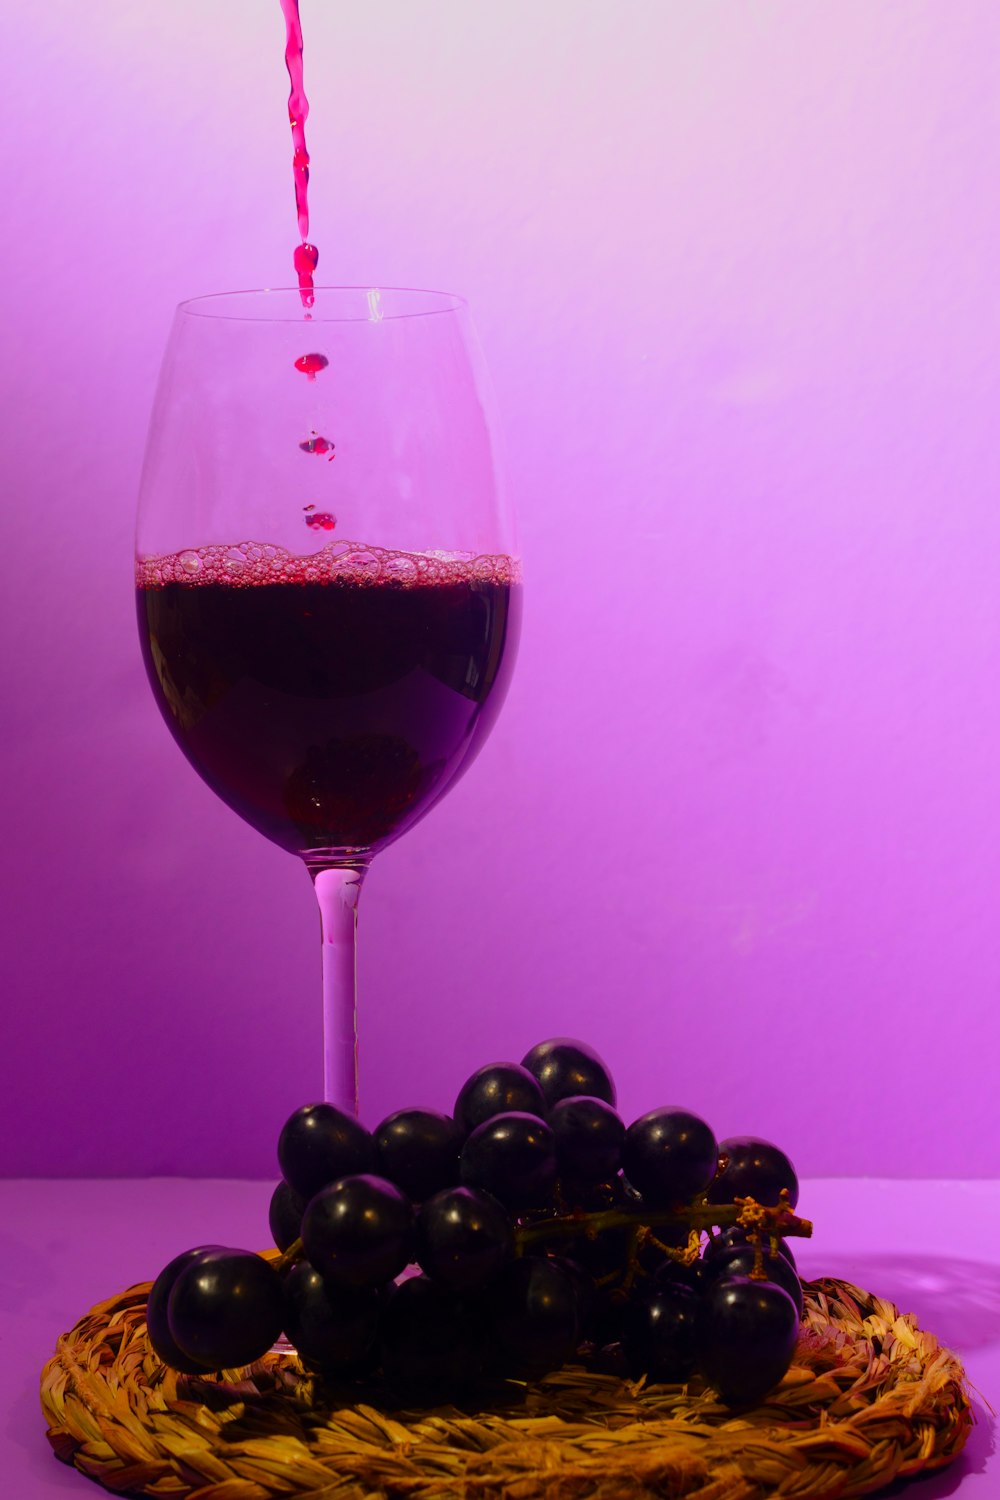 a glass of red wine being poured into a glass